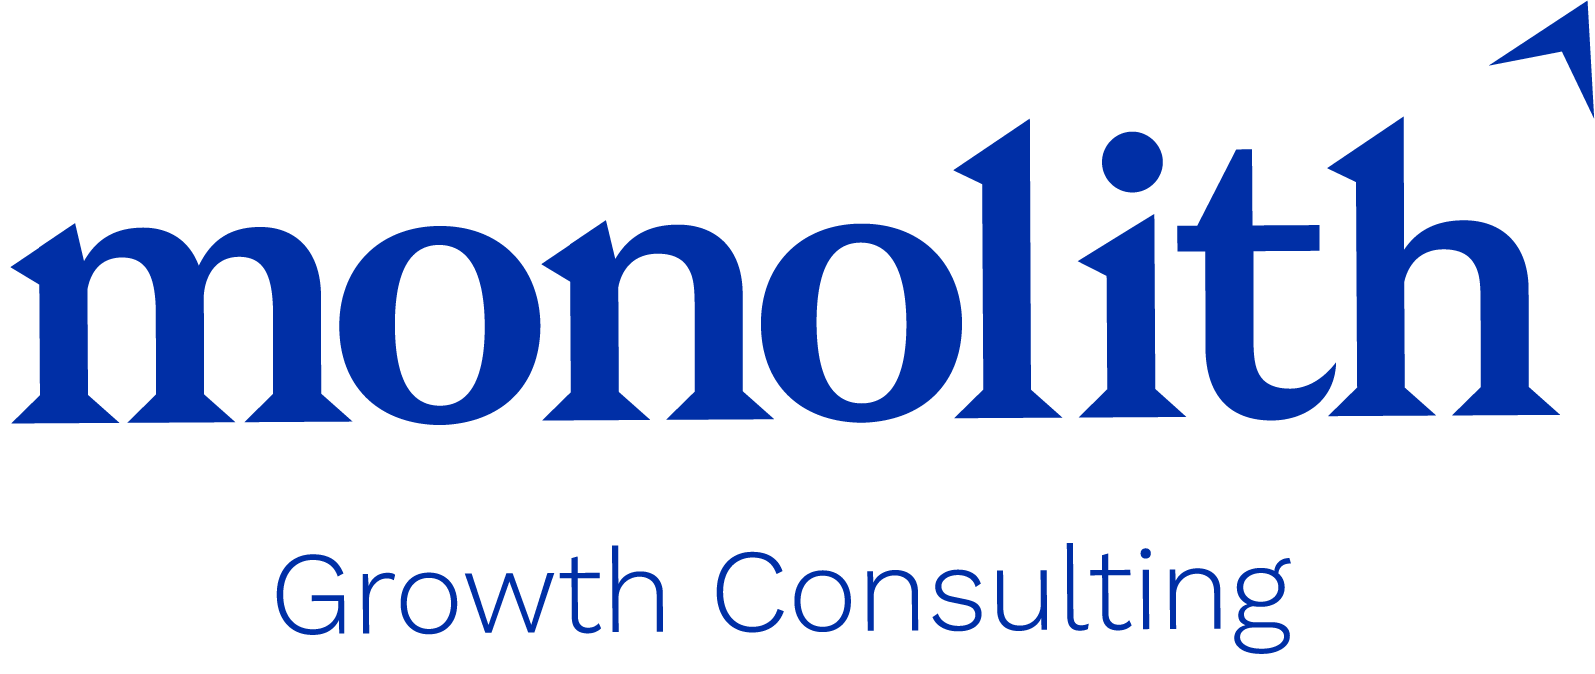 Monolith Growth Consulting